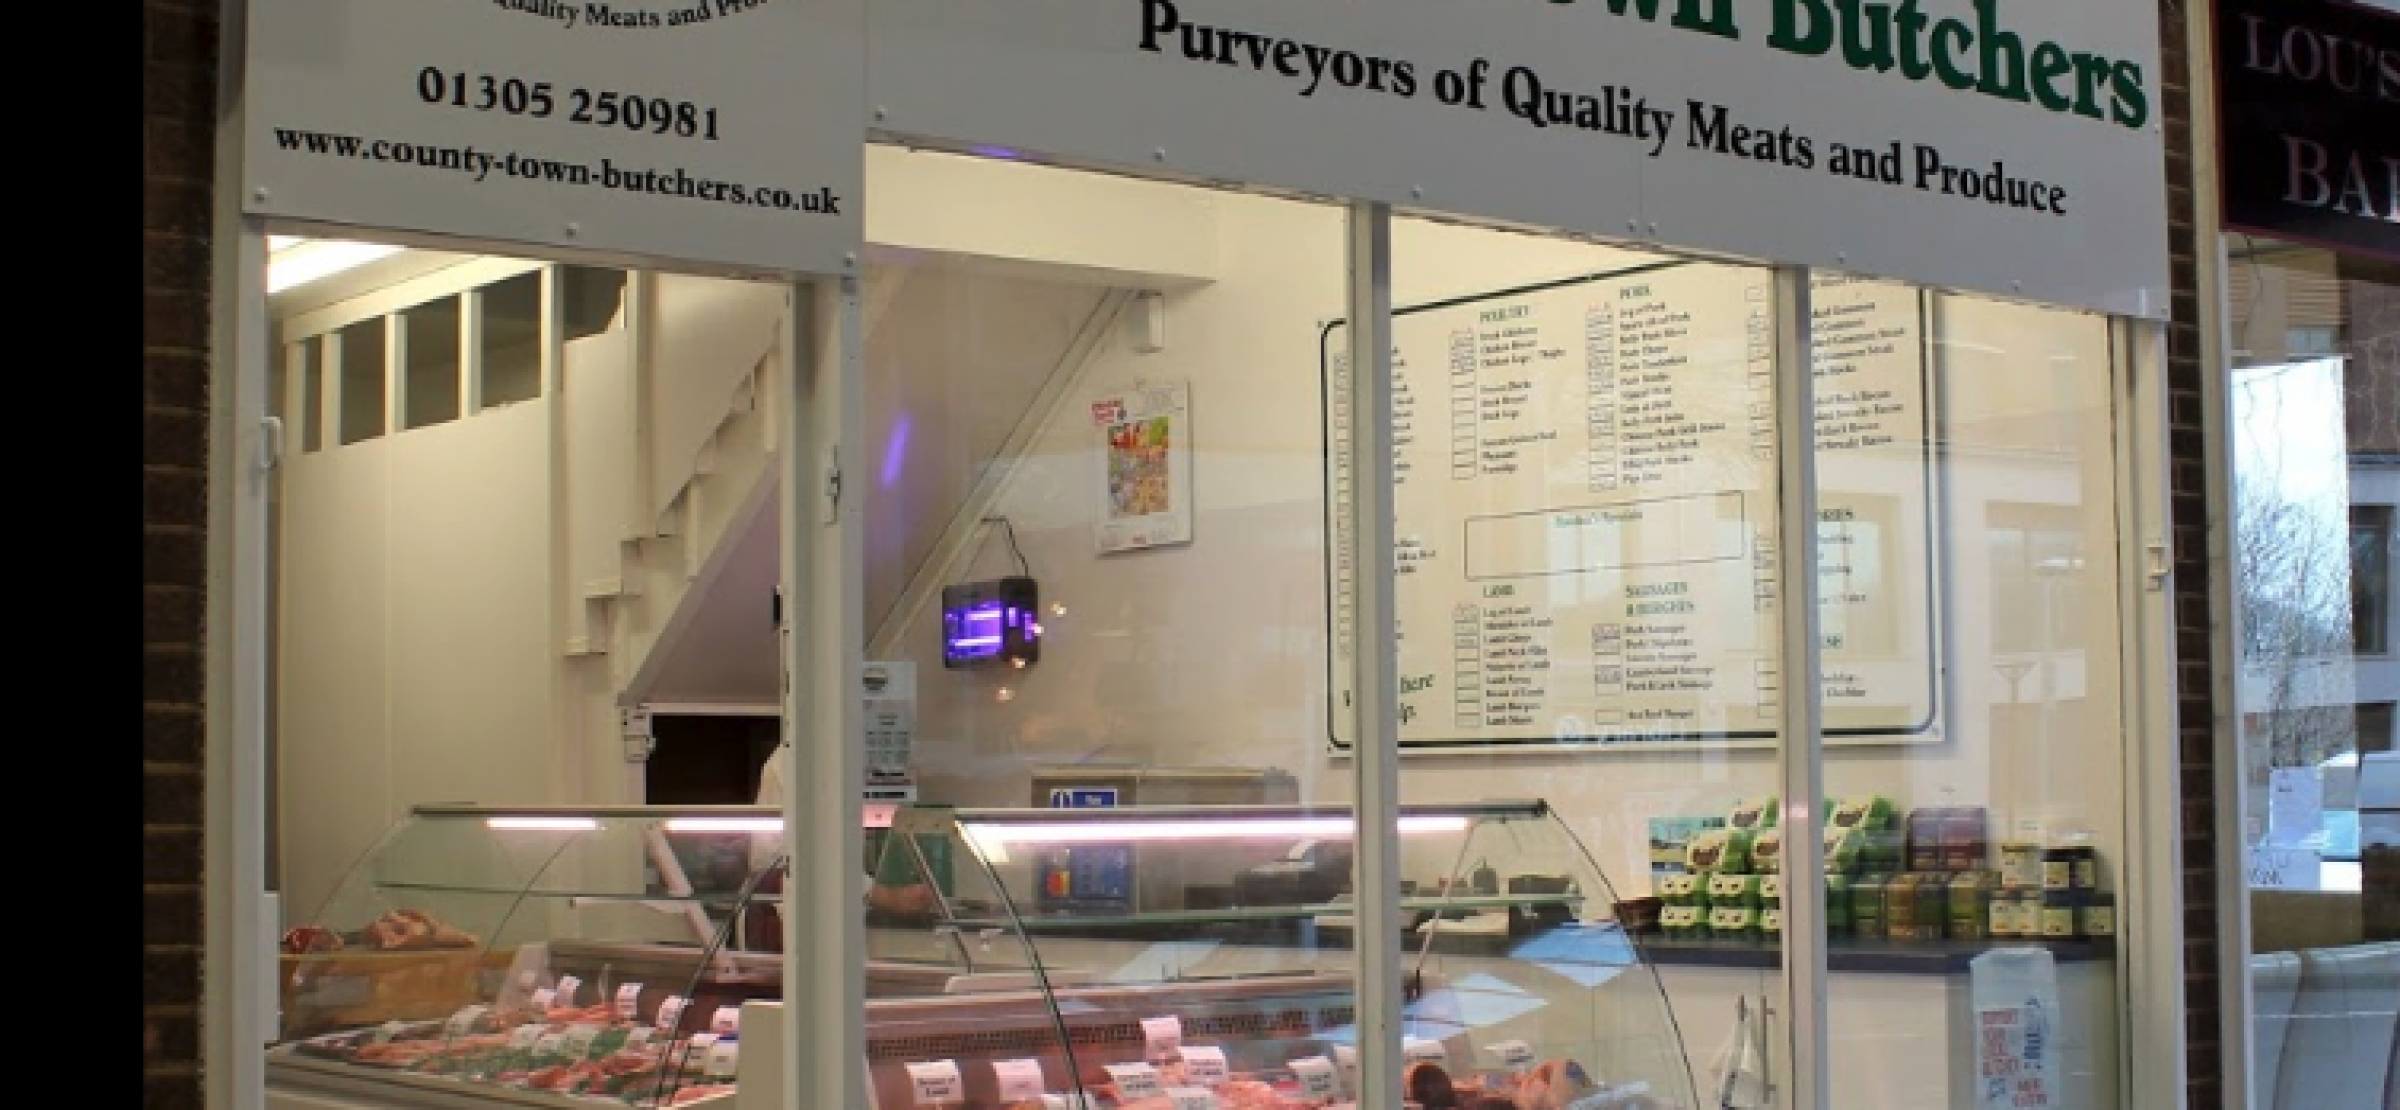 County Town Butchers